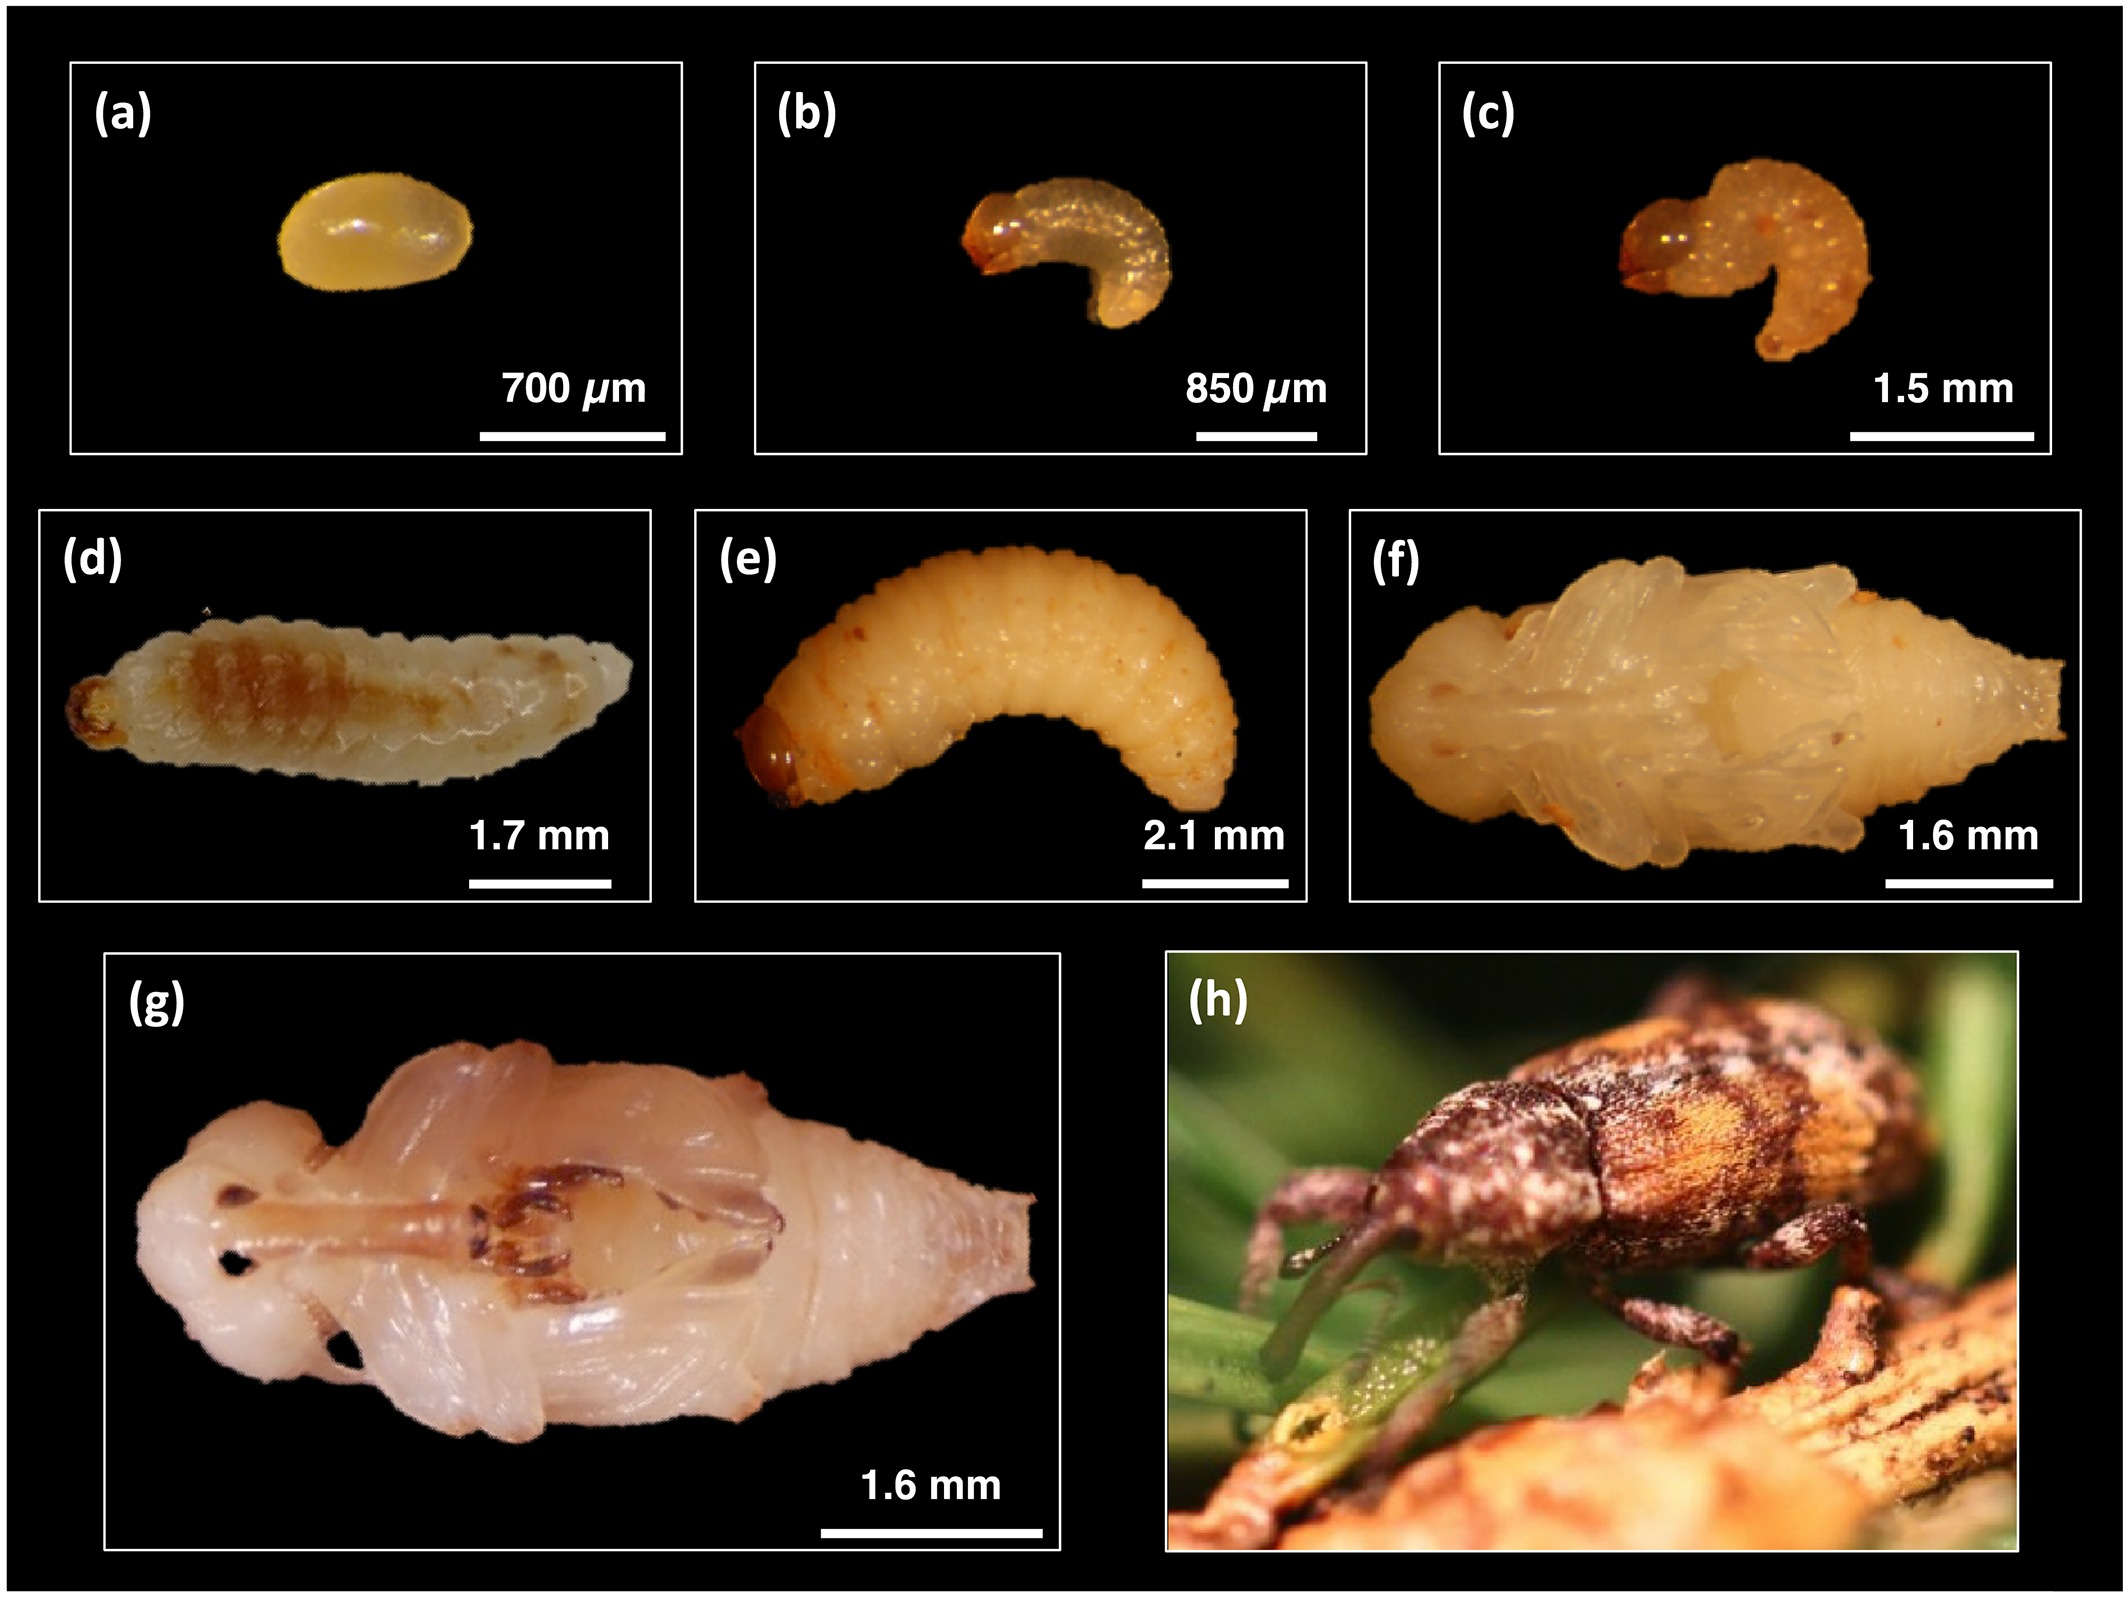 Life stages of the white pine weevil from egg to adult